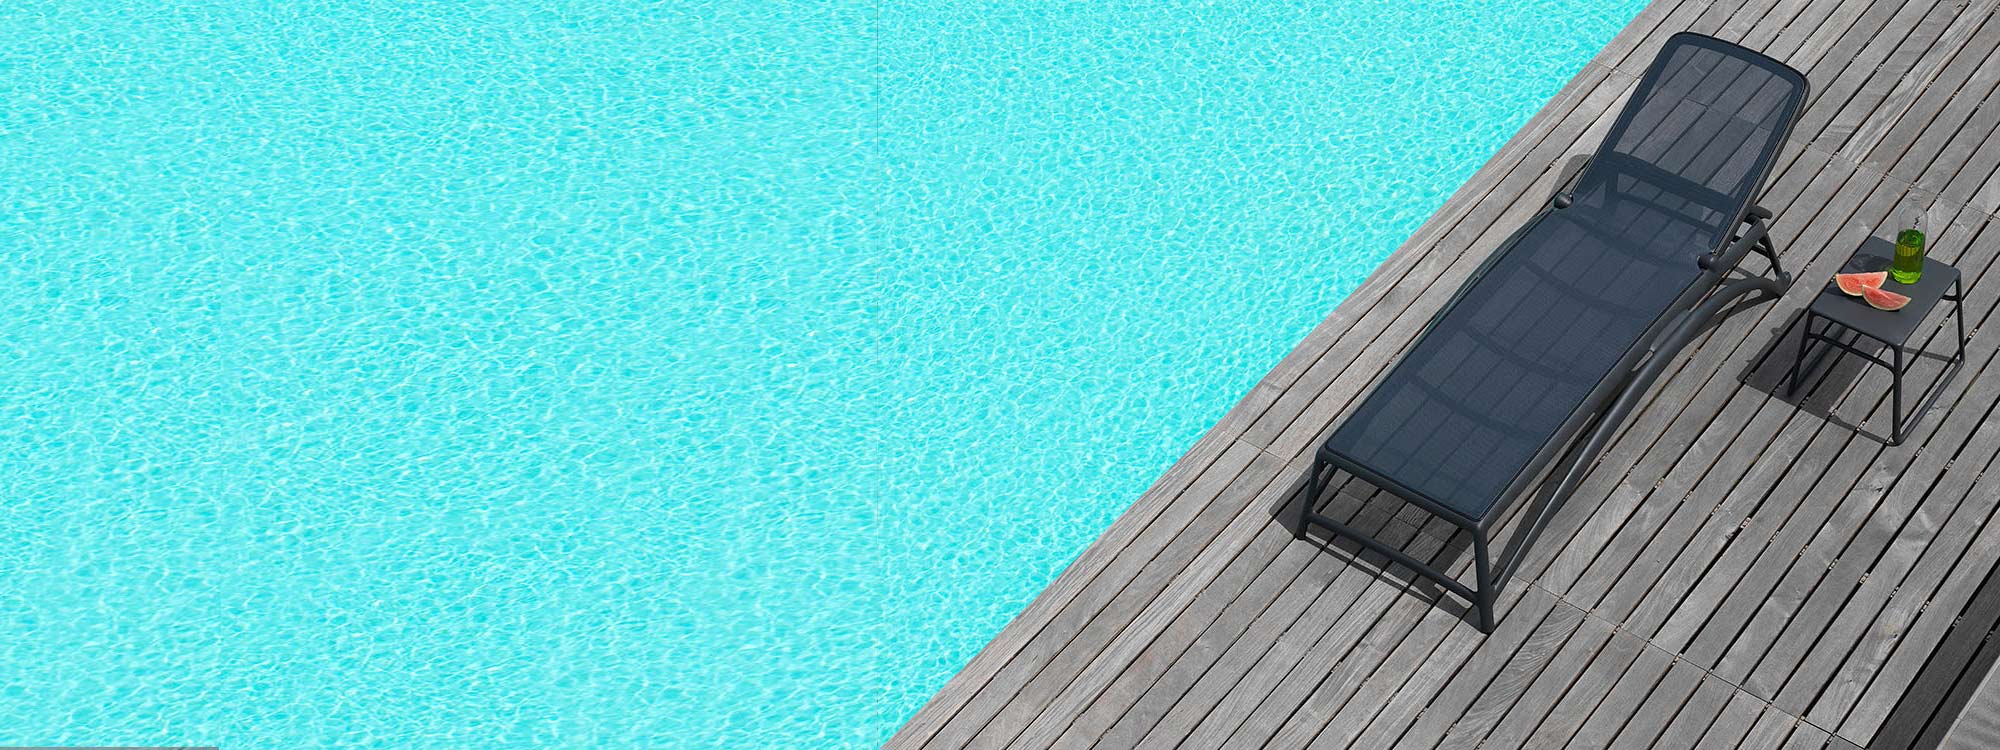 Anthracite ATLANTICO Contract SUN LOUNGER Is A BUDGET Sun Lounger & MODERN Stacking Sun Bed By Nadi HIGH QUALITY Poolside FURNITURE Company, Italy.